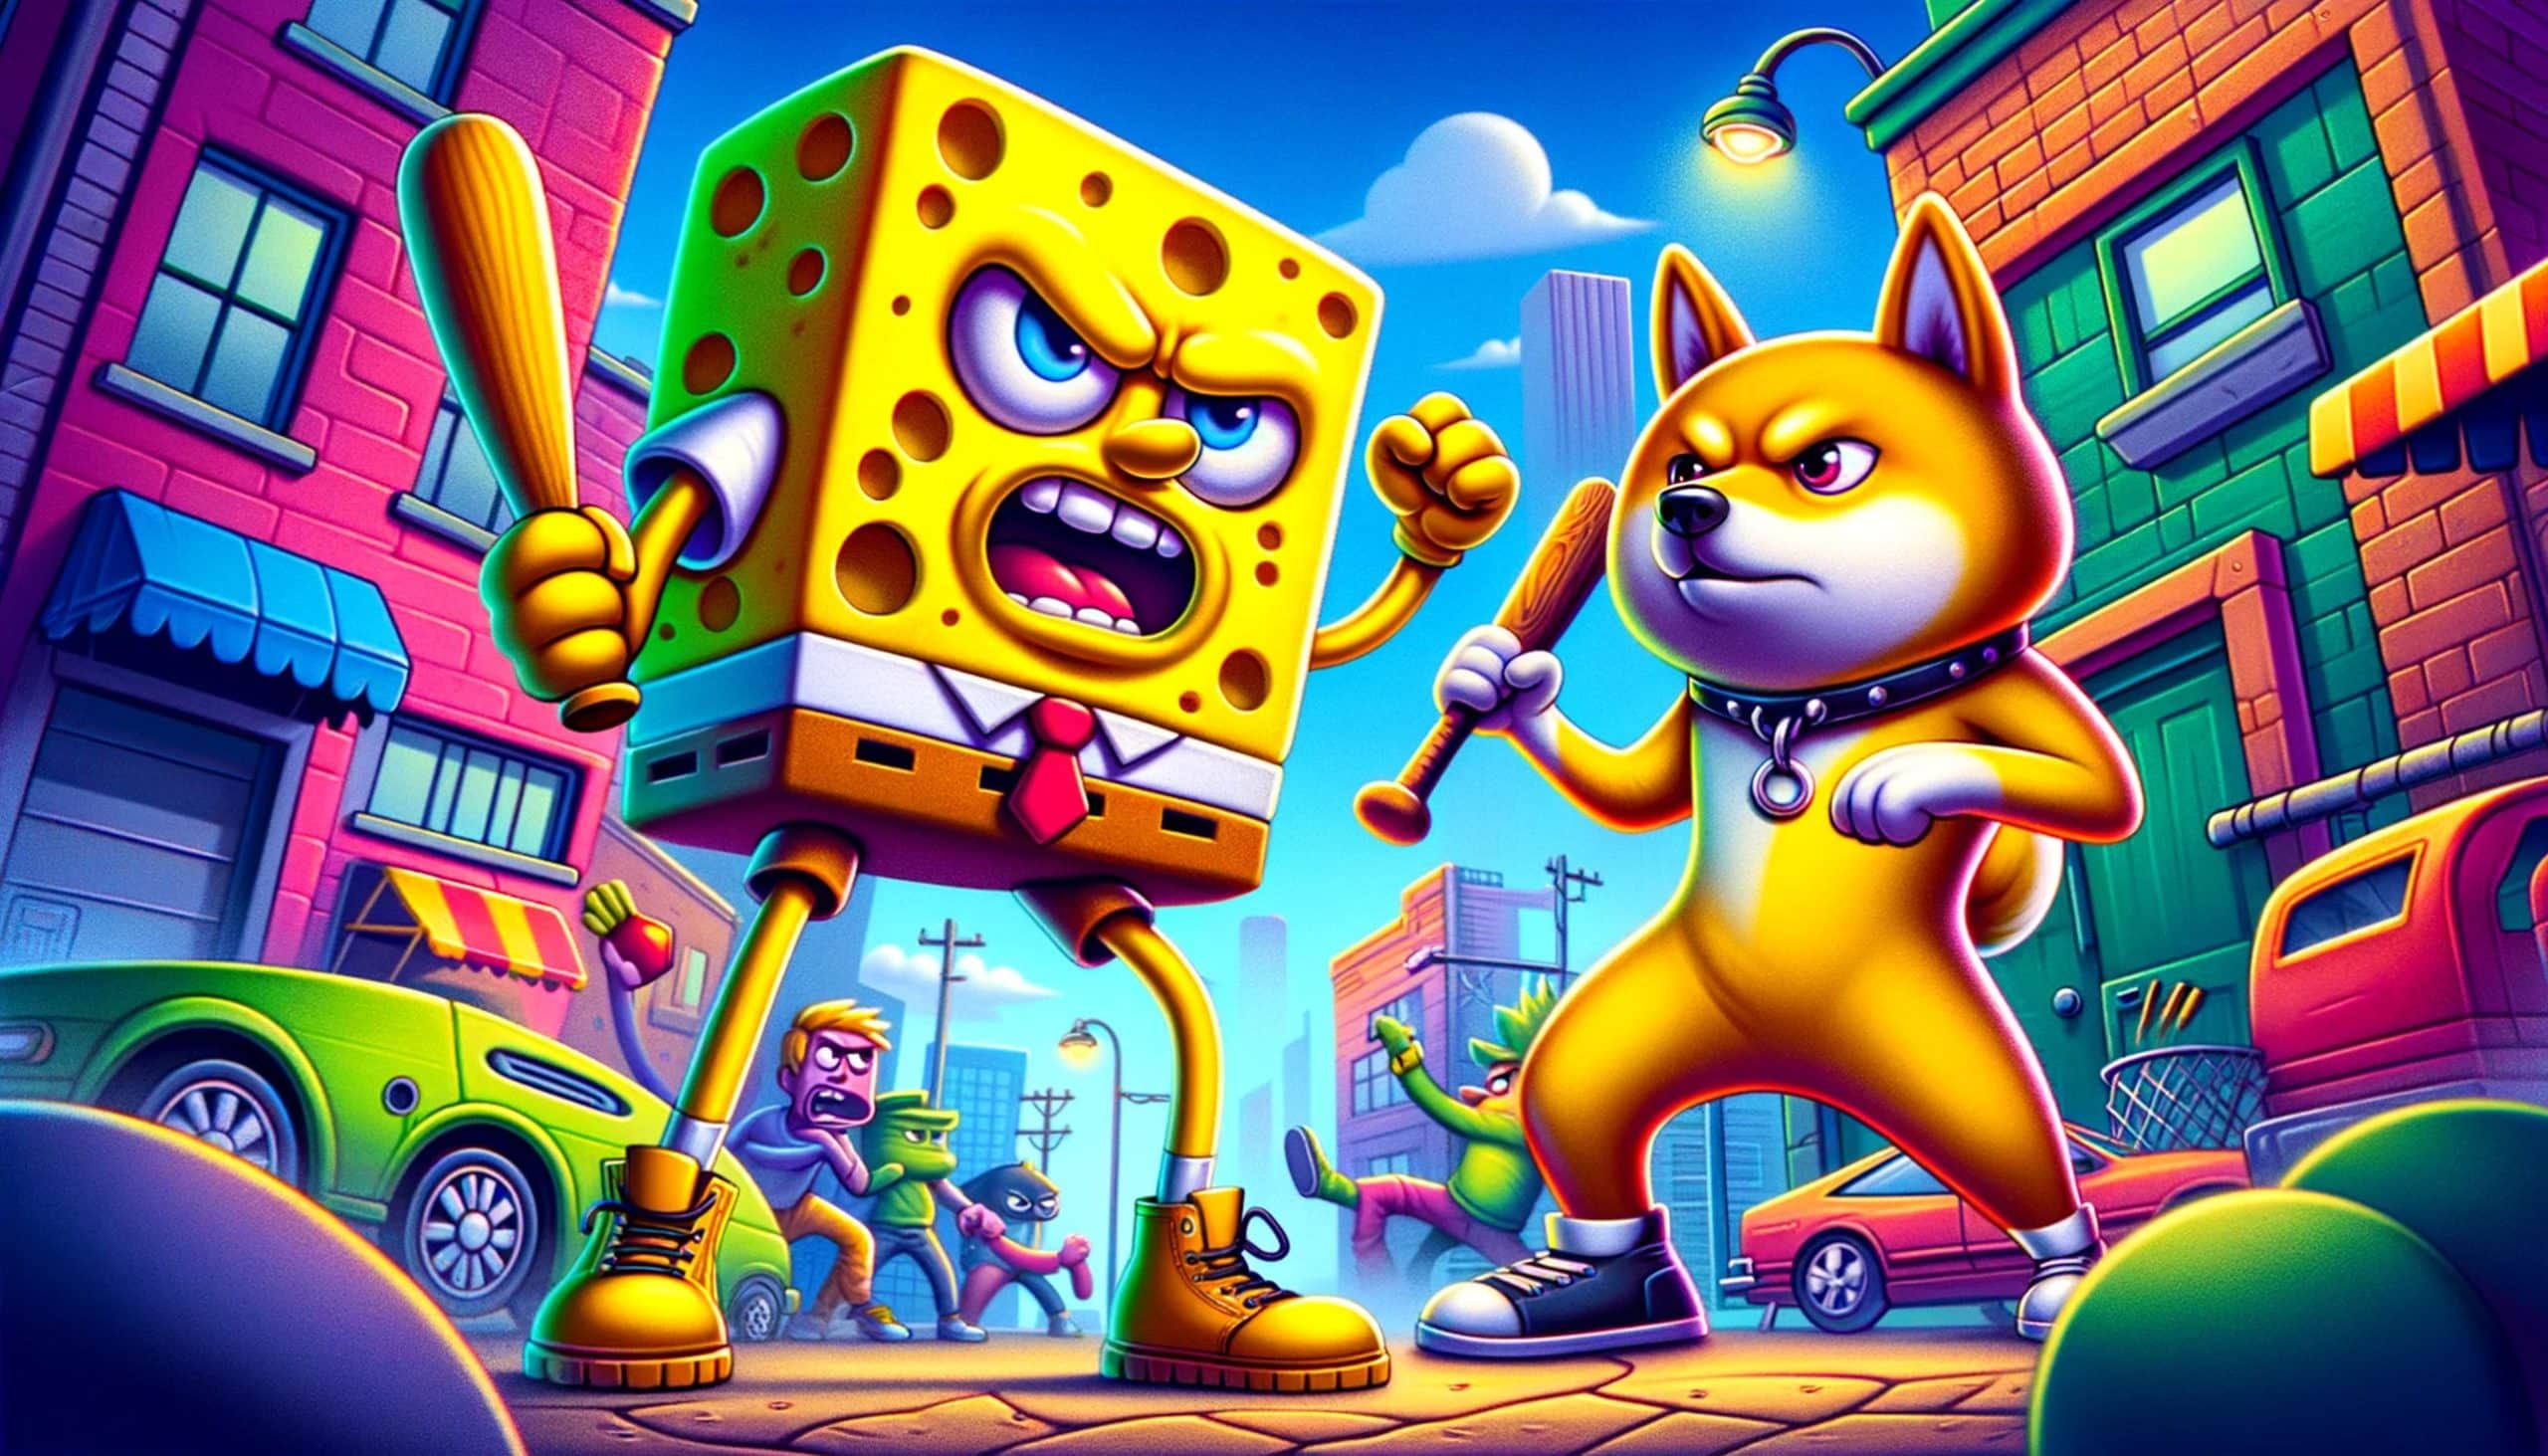 sponge character engaged in a street fight against a bat-wielding shiba inu dog